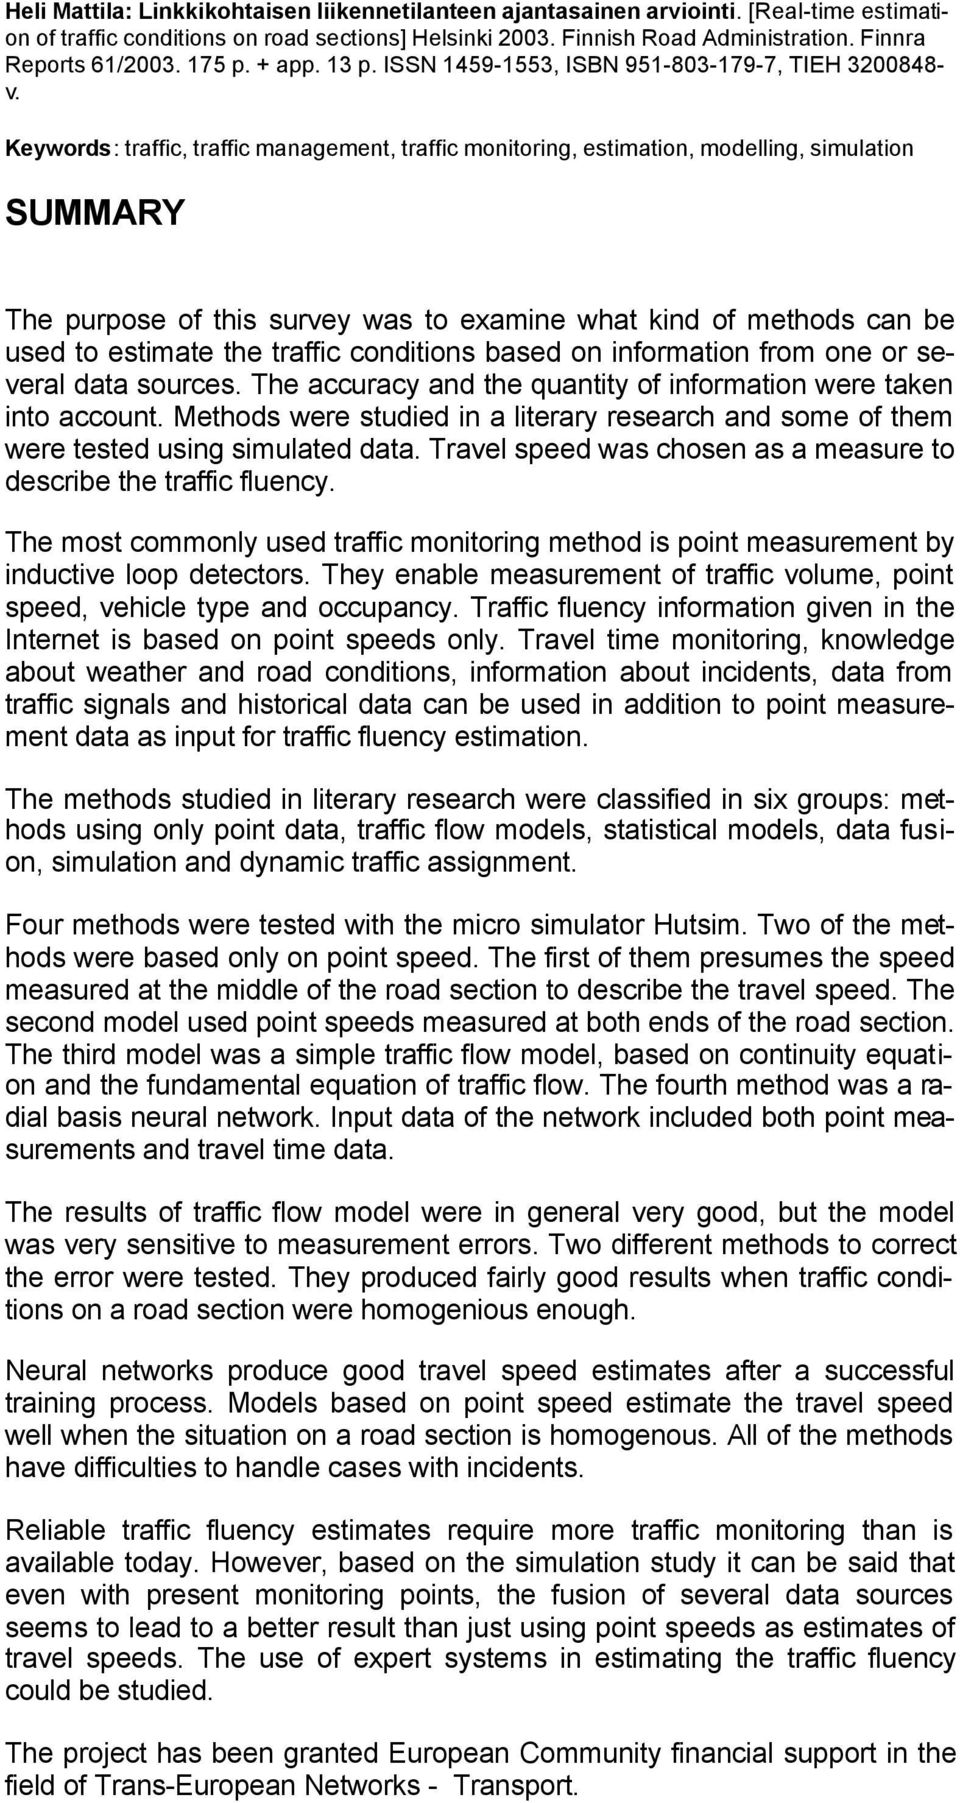 Keywords: traffic, traffic management, traffic monitoring, estimation, modelling, simulation SUMMARY The purpose of this survey was to examine what kind of methods can be used to estimate the traffic